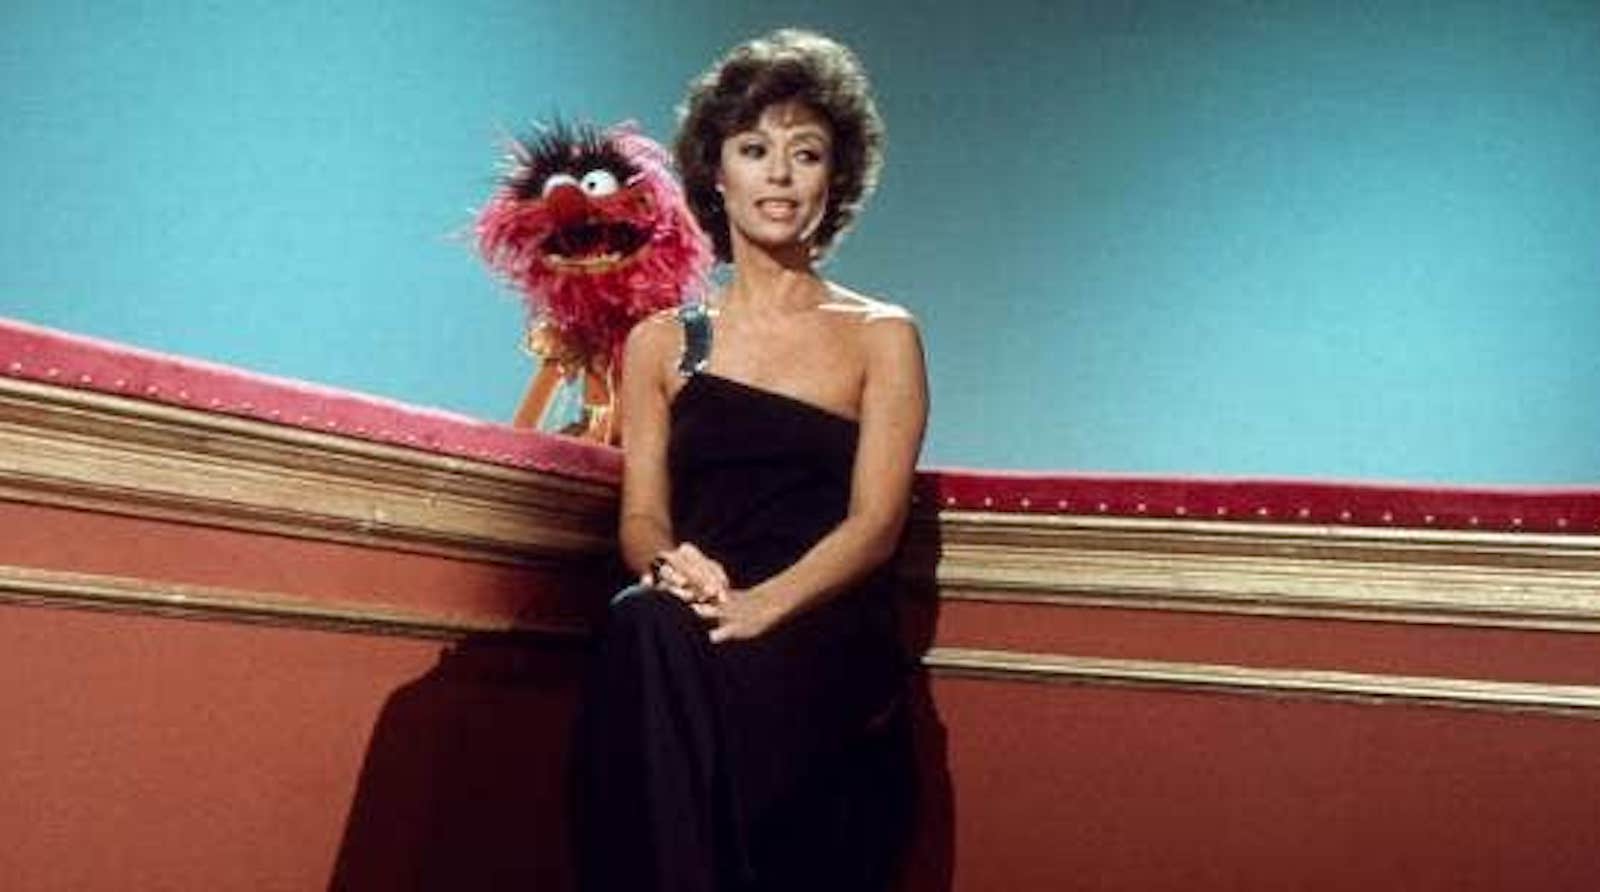 A woman in a black evening dress sits in the corner of a set, with a red Muppet behind her.